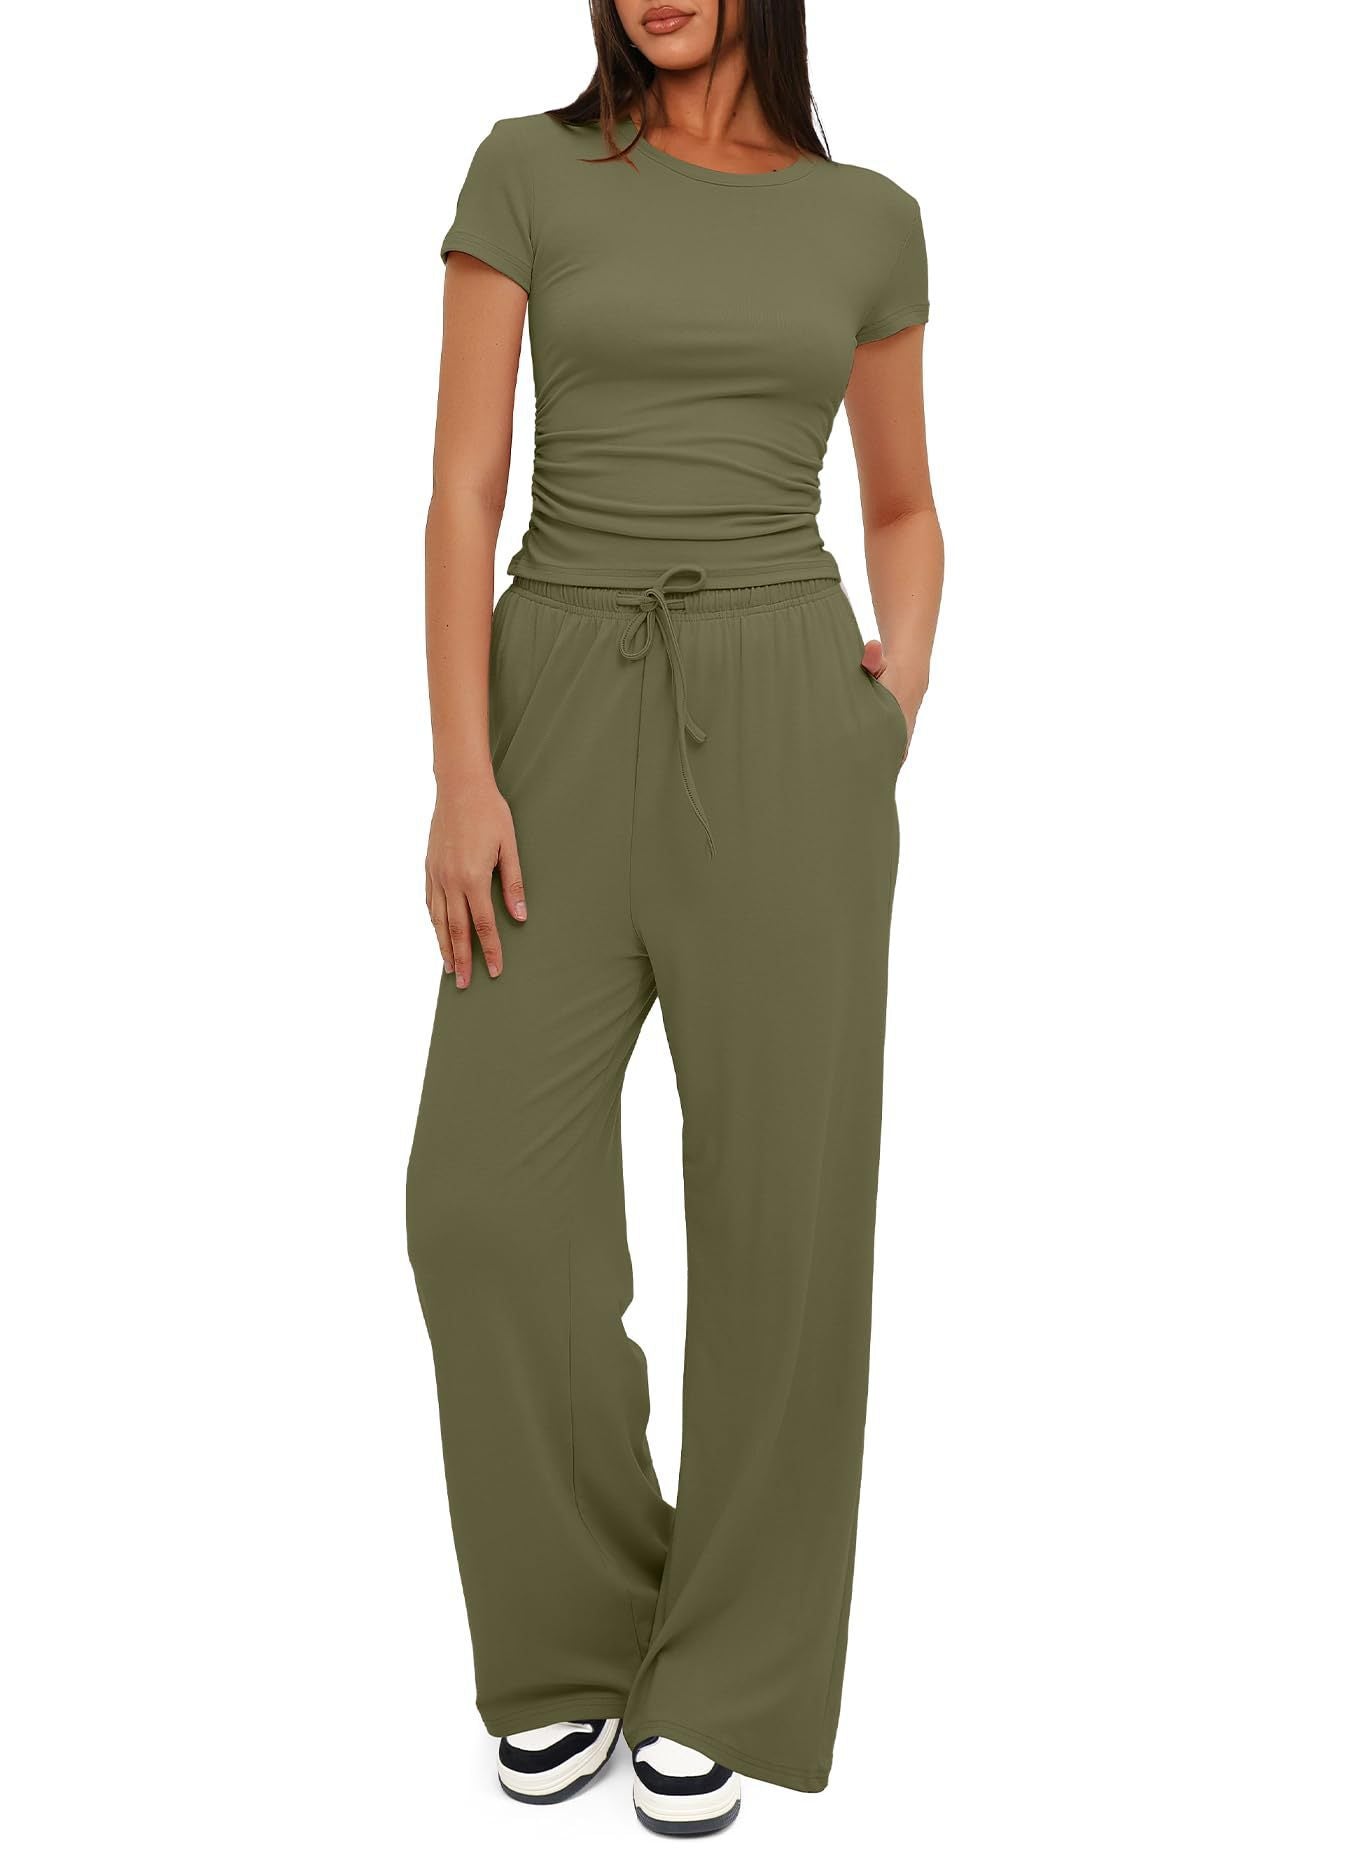 Army Green - 2pcs Solid Color Casual Sport Short-sleeved Women'sTop And High-waisted Drawstring Wide-leg Pants - womens pants set at TFC&H Co.